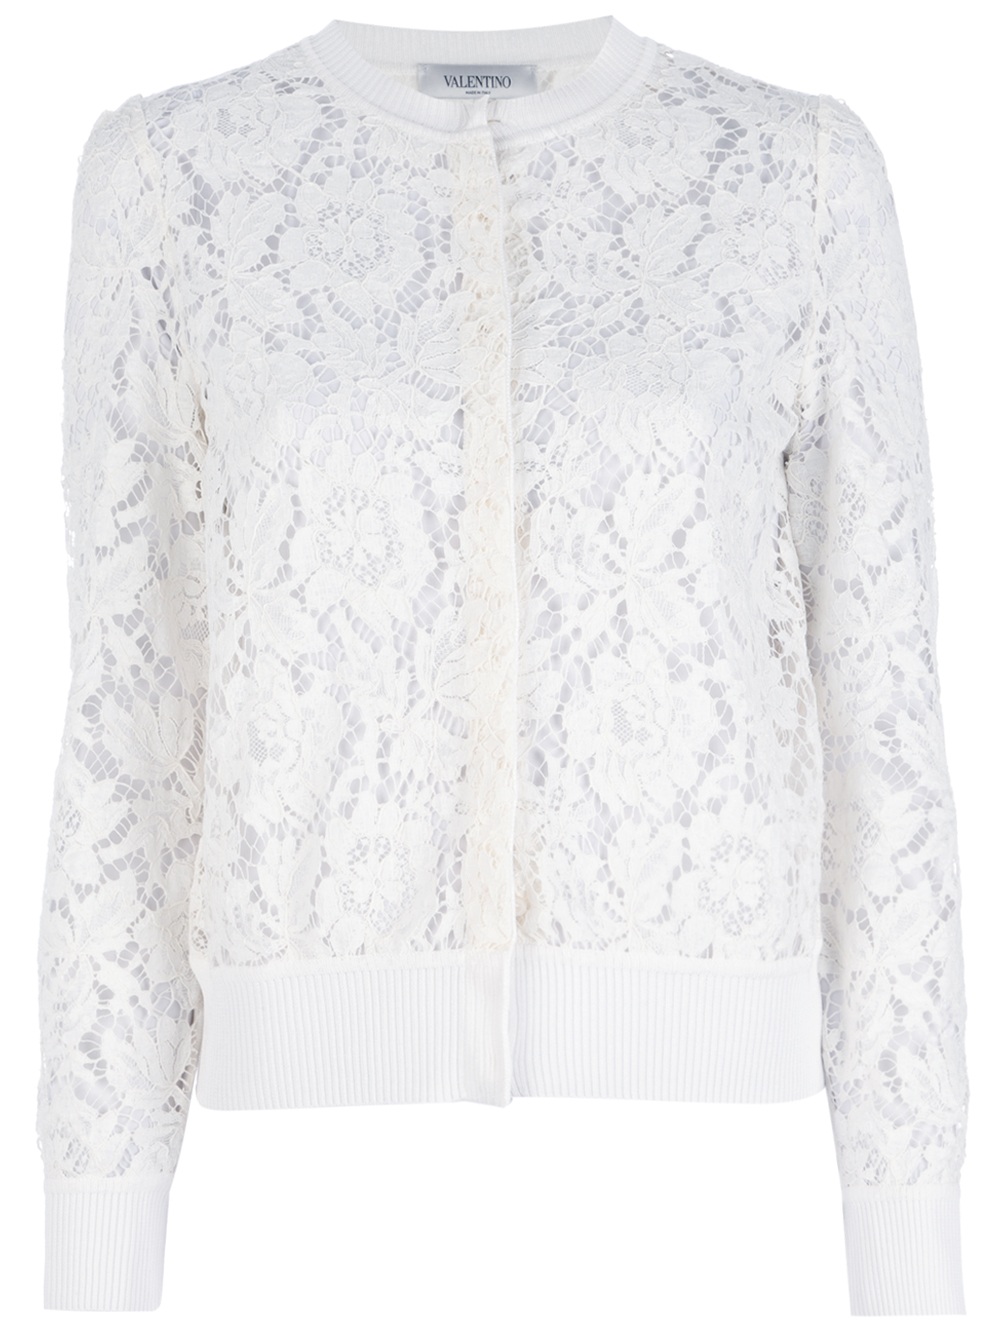 Valentino Lace Cardigan in White | Lyst